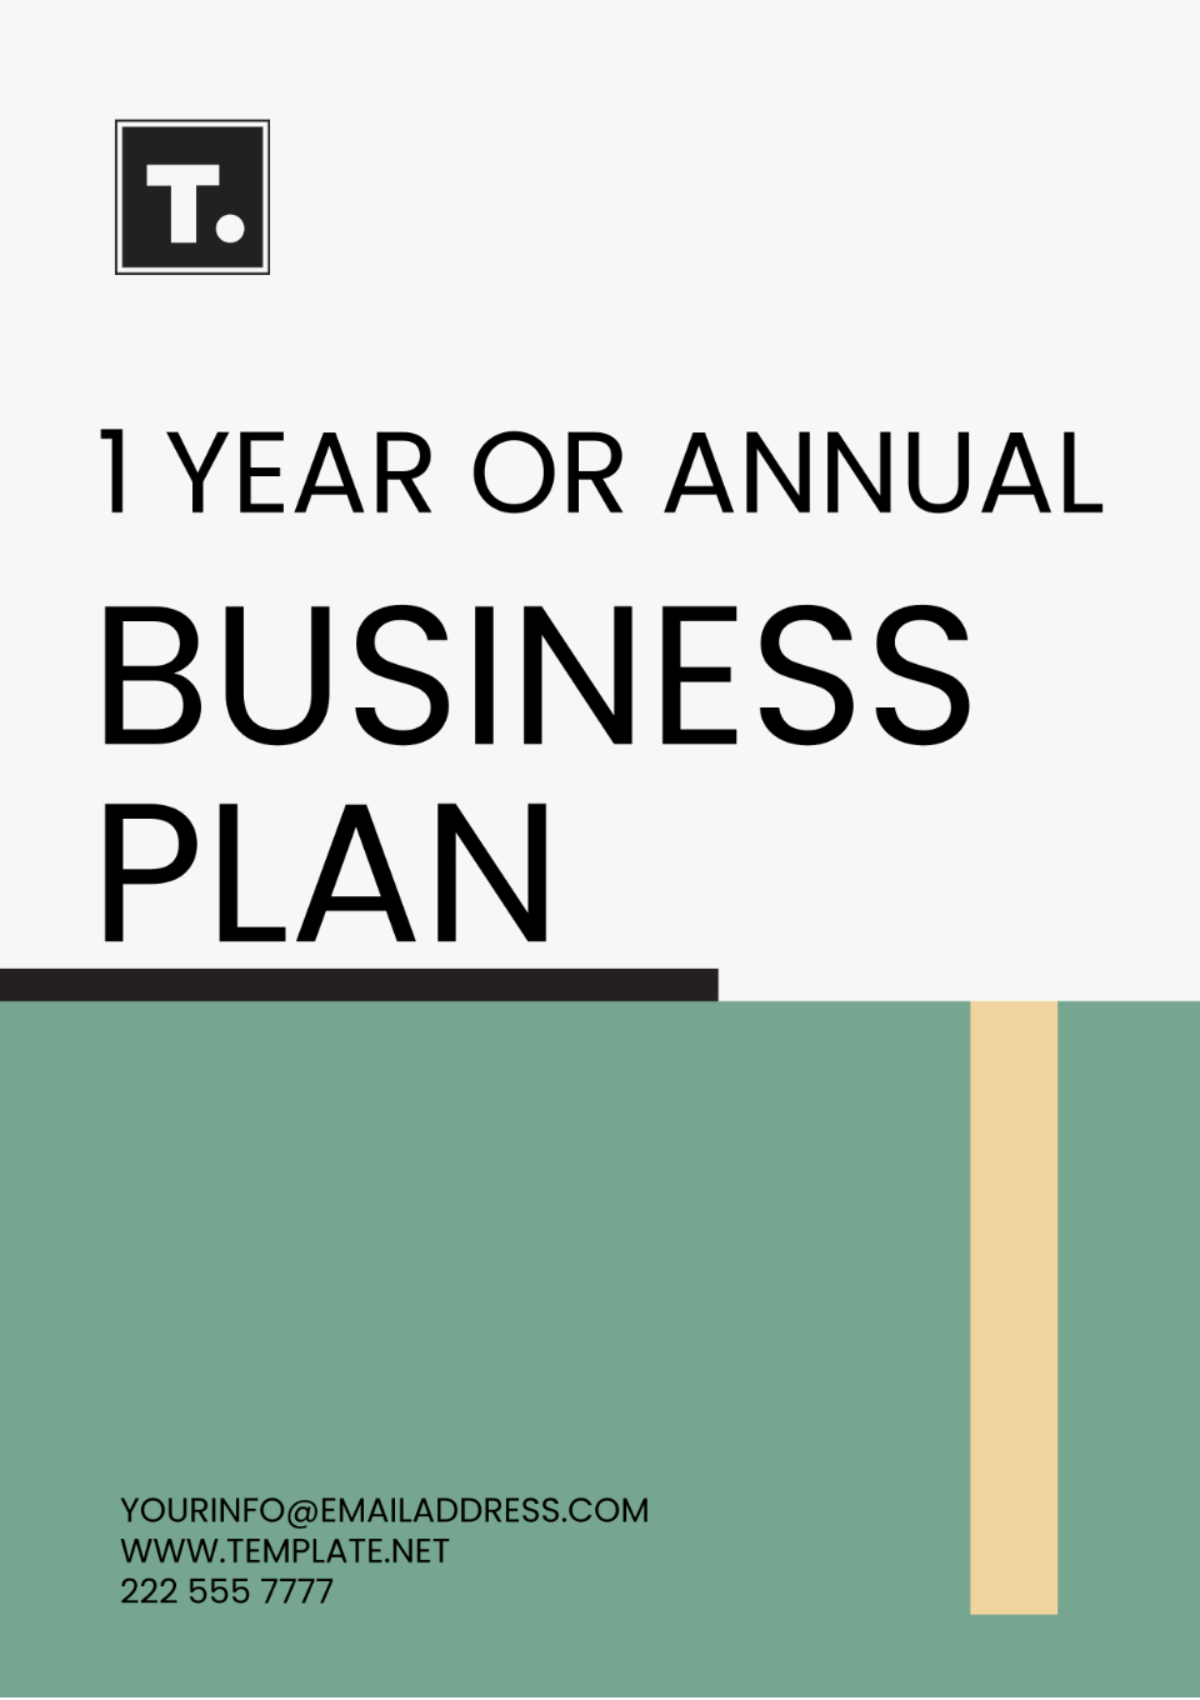 Free 1 Year Or Annual Business Plan Template